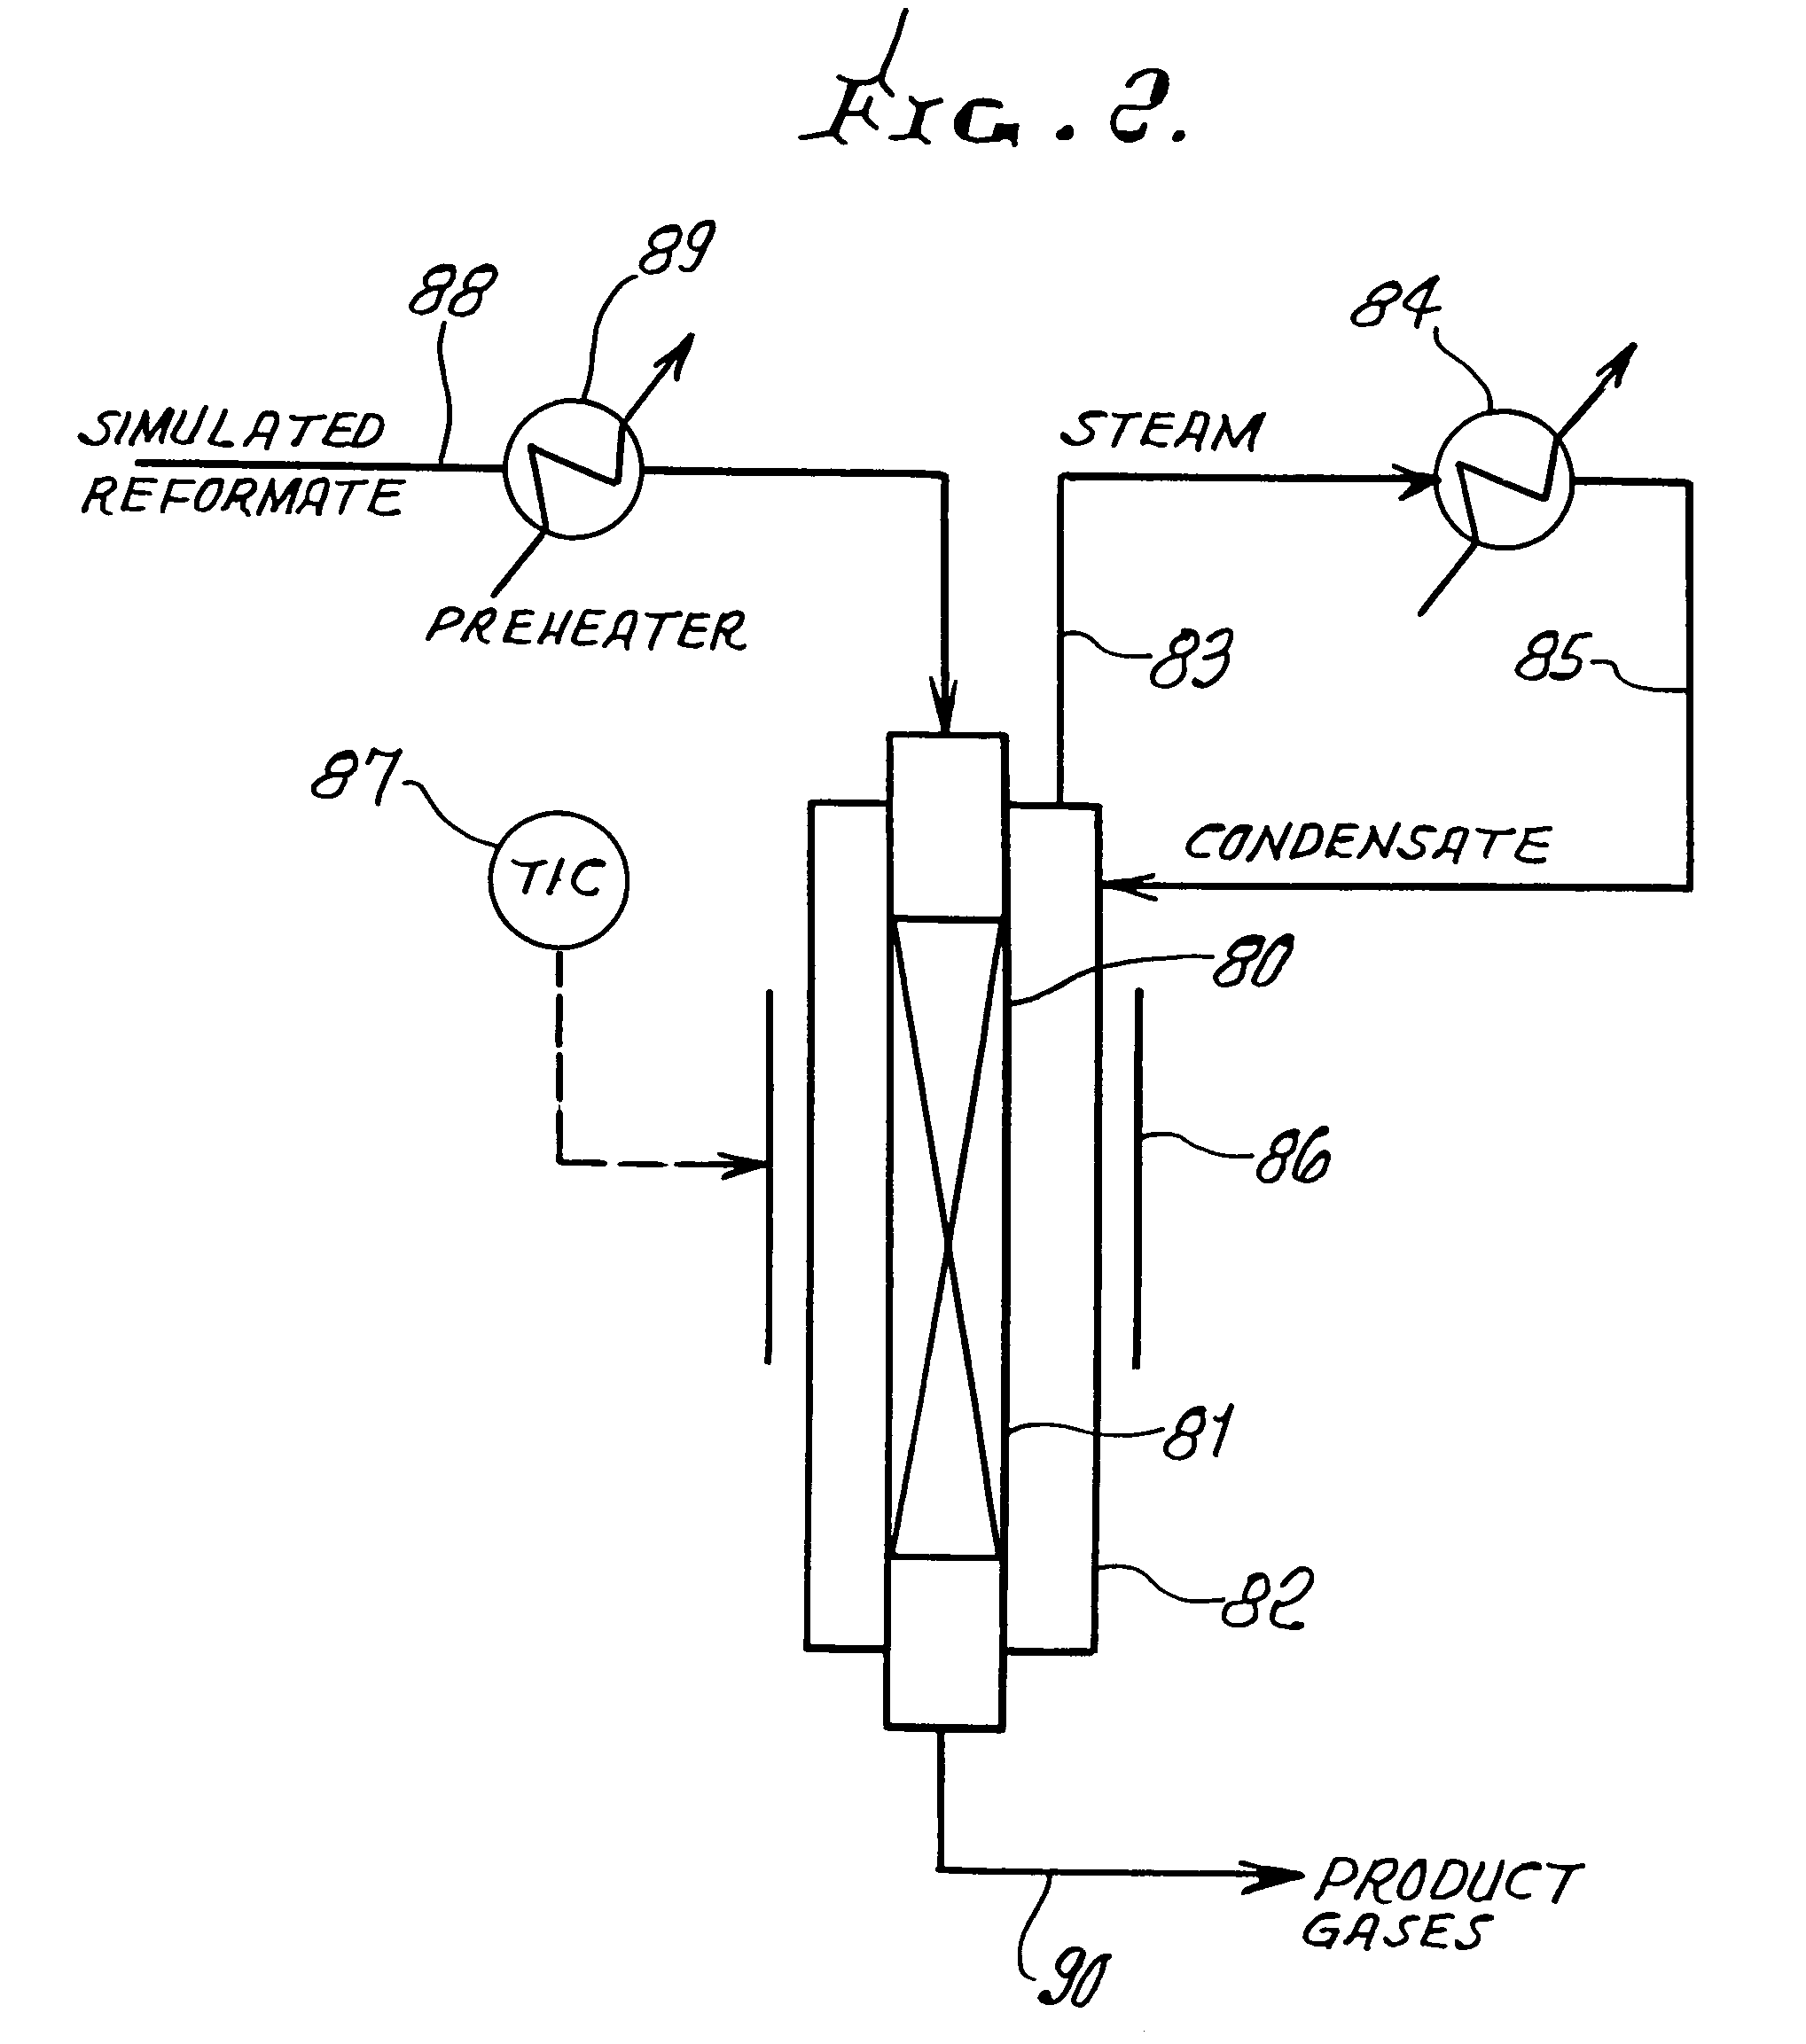 Thermally-integrated low temperature water-gas shift reactor apparatus and process